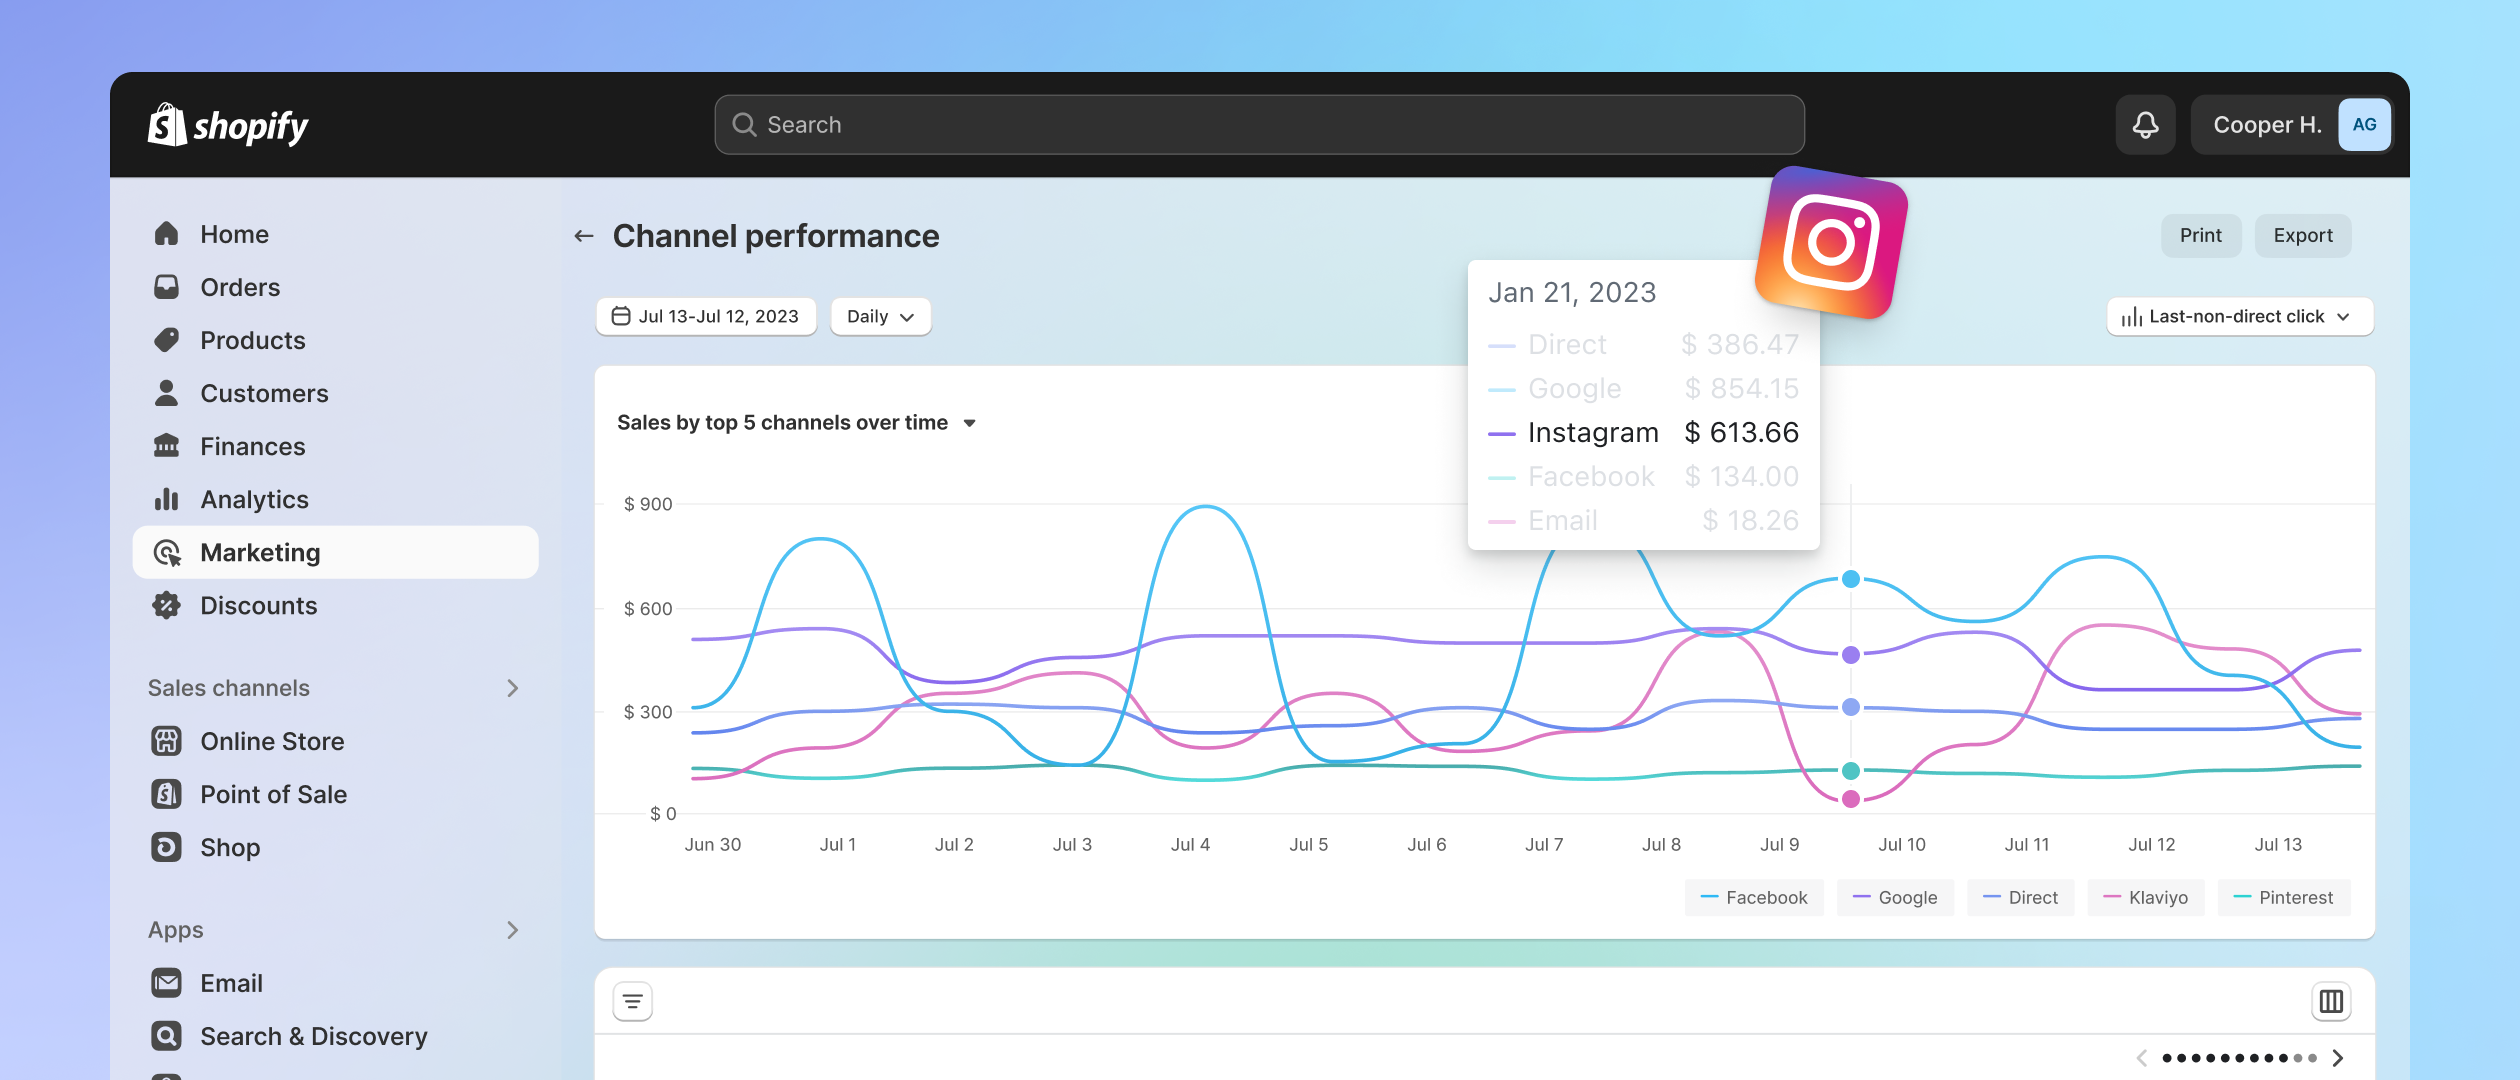 The marketing dashboard shows key marketing metrics and an overview of performance across different channels.